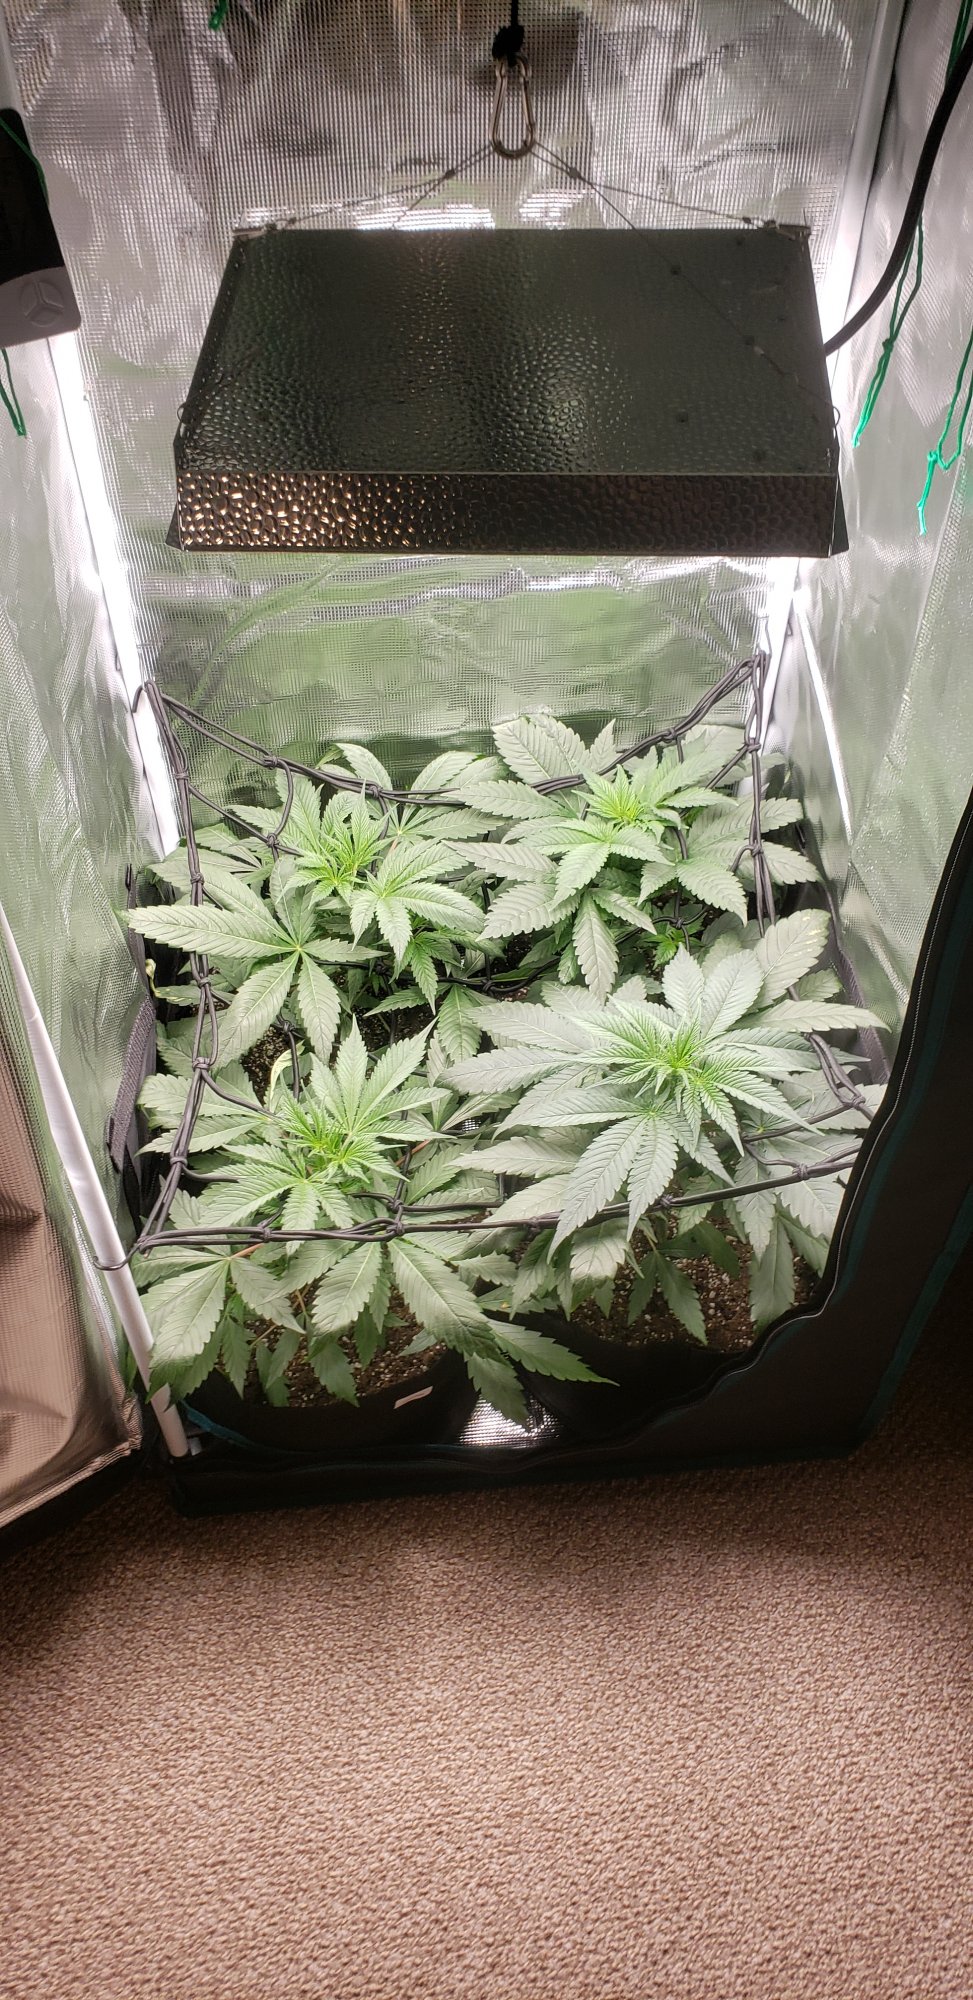 Help when should i swap to flowering